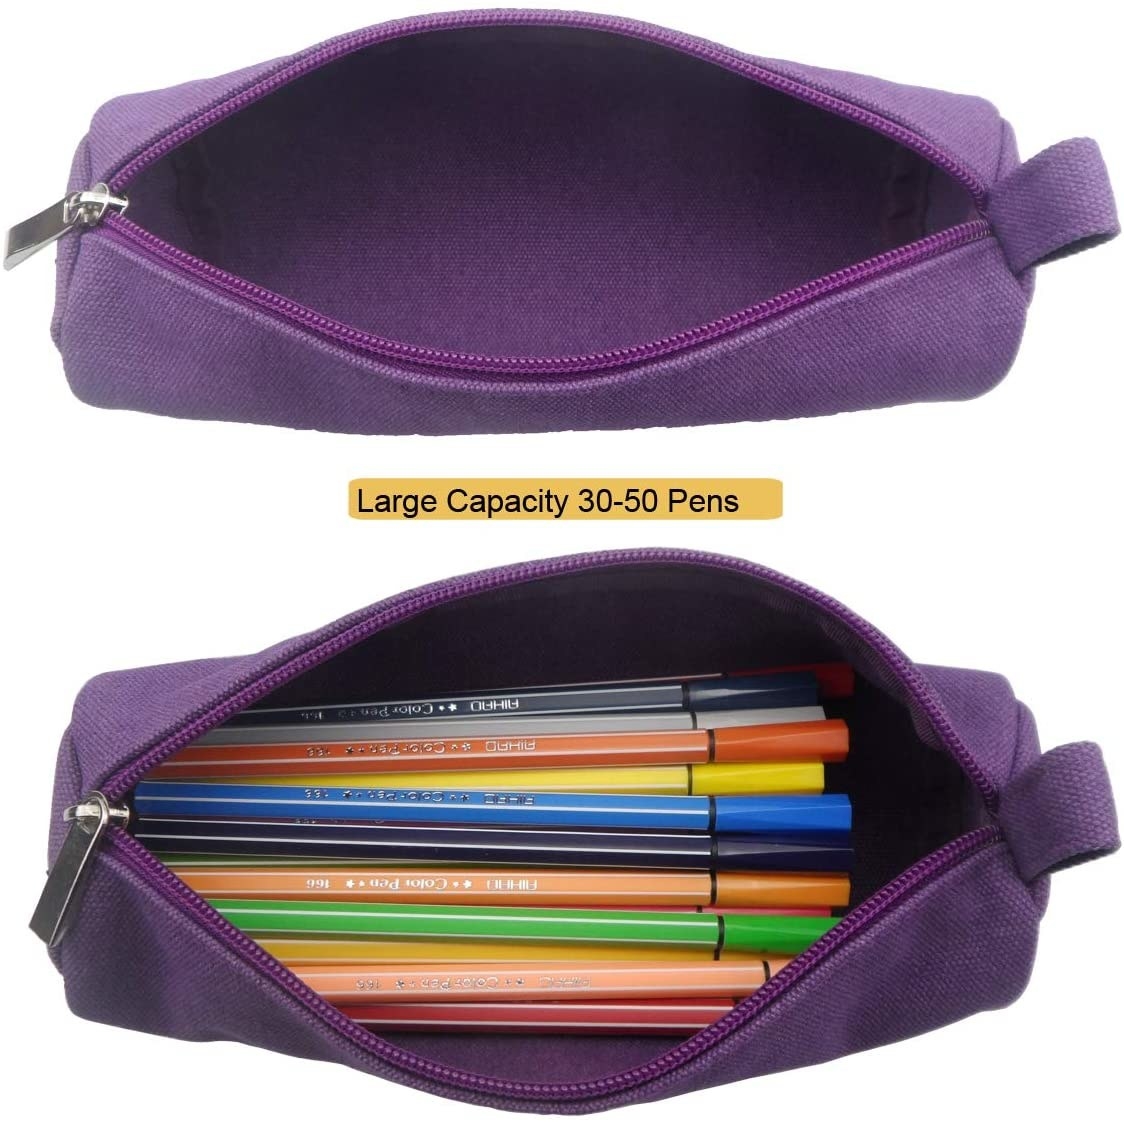 A pencil case unzippered showing the empty inside and one showing pens